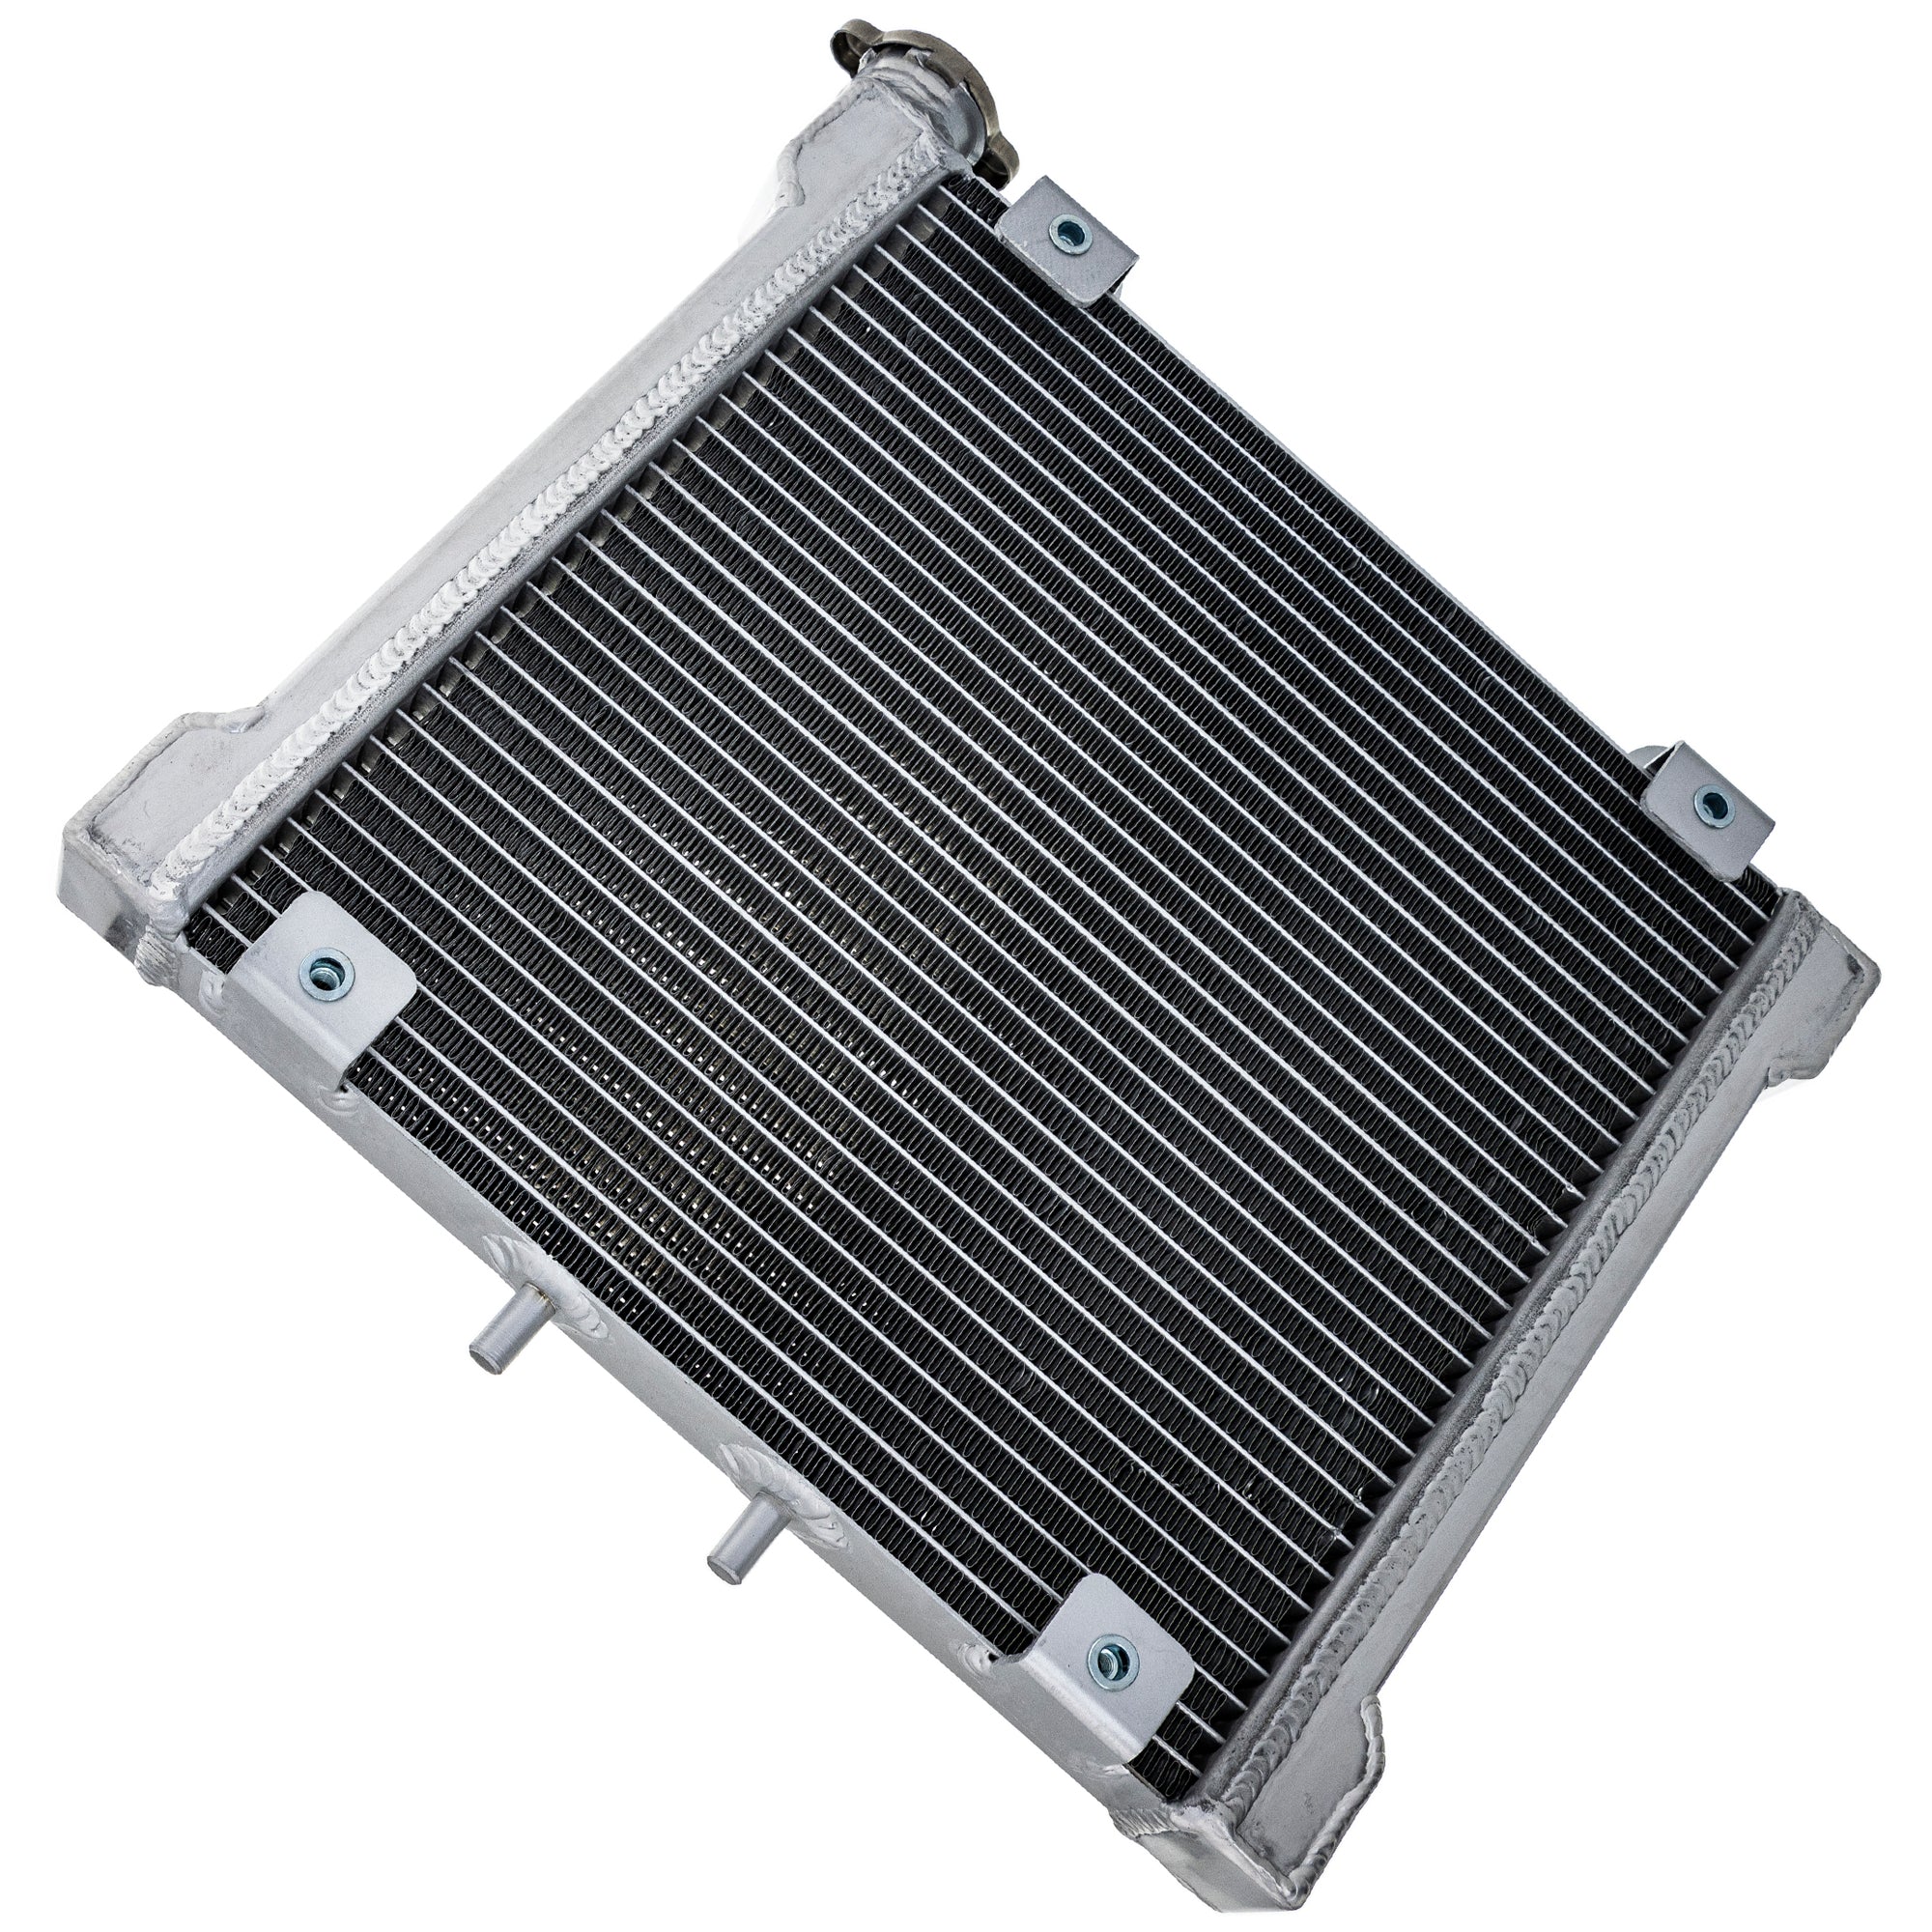 Radiator for Can-Am Bombardier DS650 X 709200145 2 Row with Cap